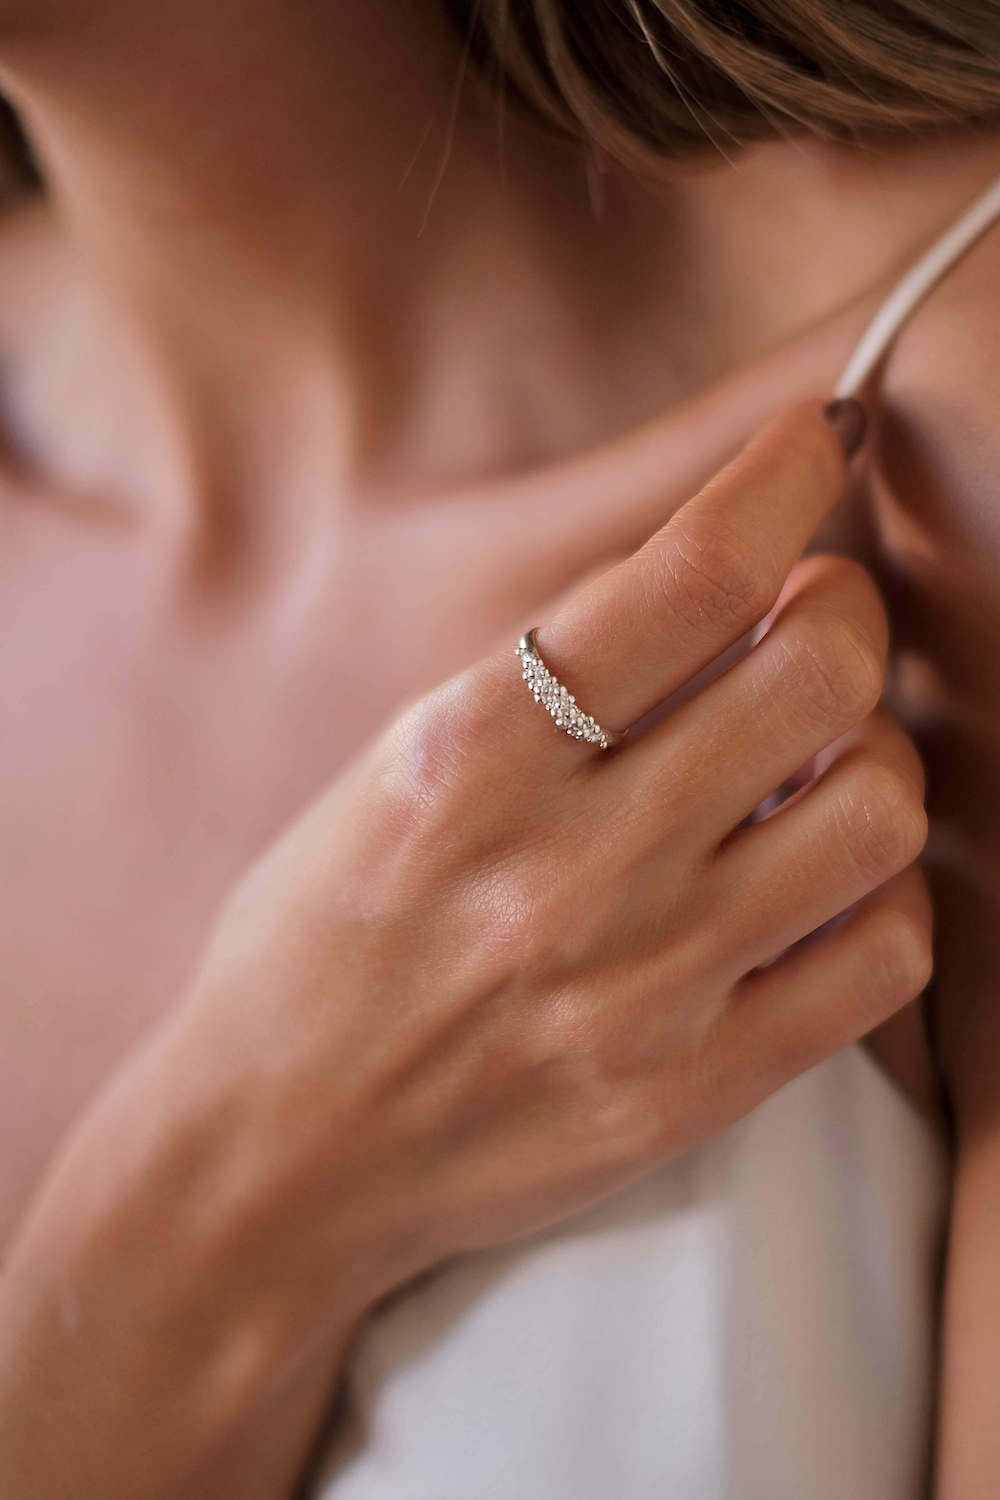 A woman exuding timeless elegance as she proudly displays her Cremilde Bispo Jewellery's Essential Dot Ring, a sparkling white diamond masterpiece that effortlessly adds an extra touch of effortless chic to any ensemble.